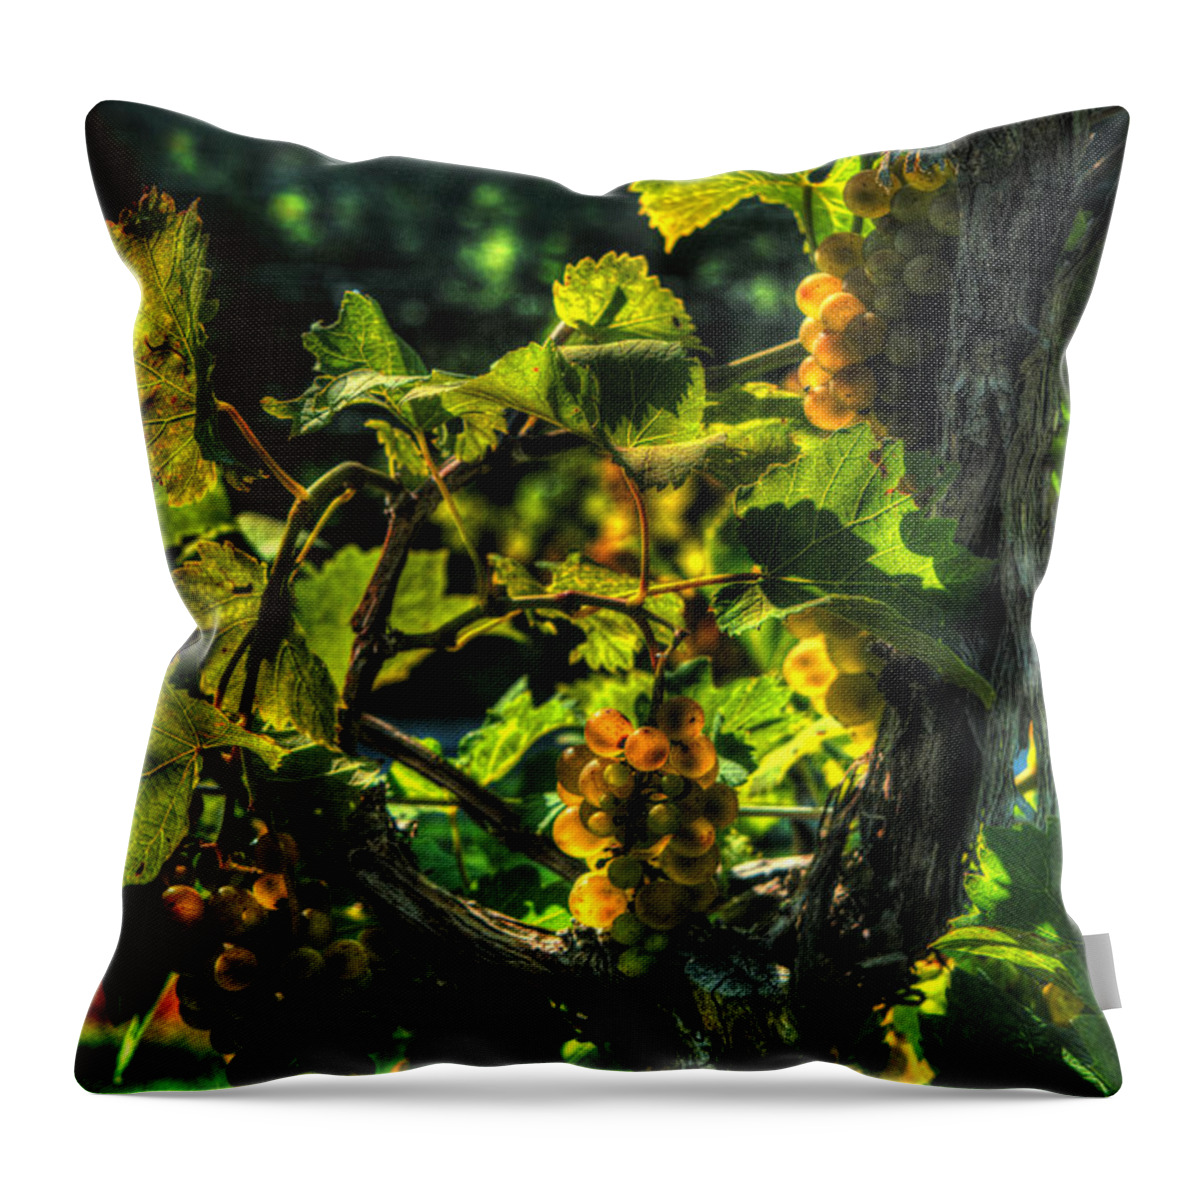 Lost Creek Chardonel Throw Pillow featuring the digital art Lost Creek Chardonel by William Fields